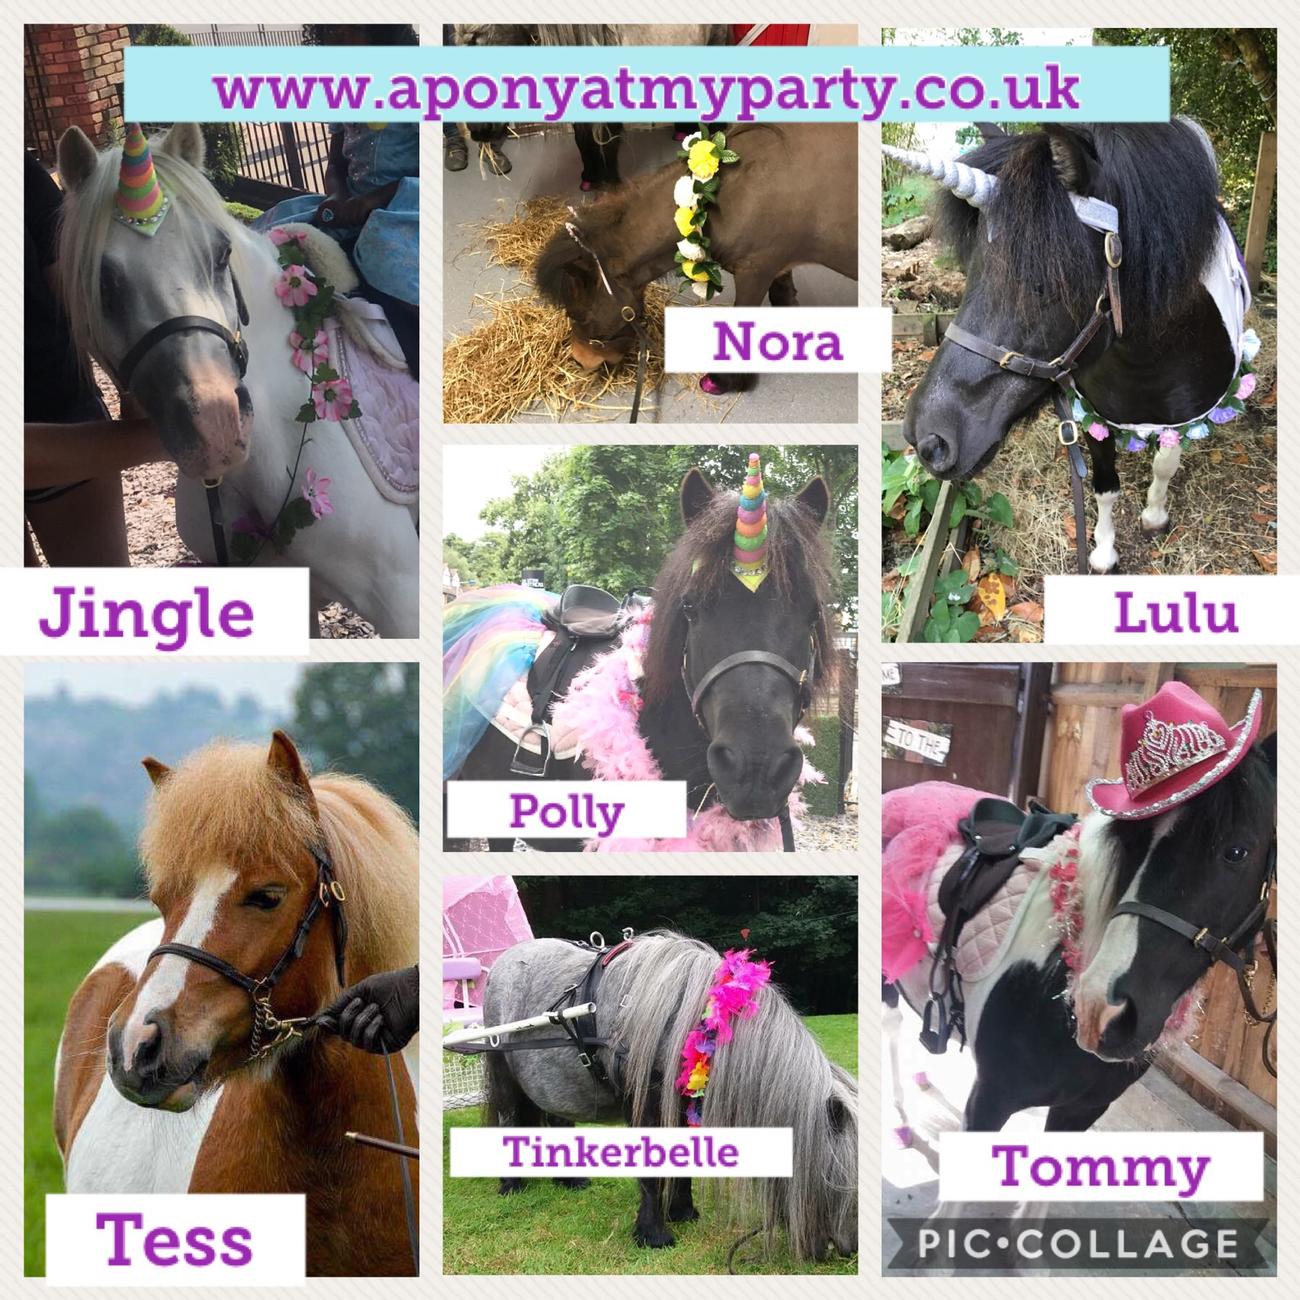 Pony at my party. Pony rides at your party essex | pony at my party gallery image 18